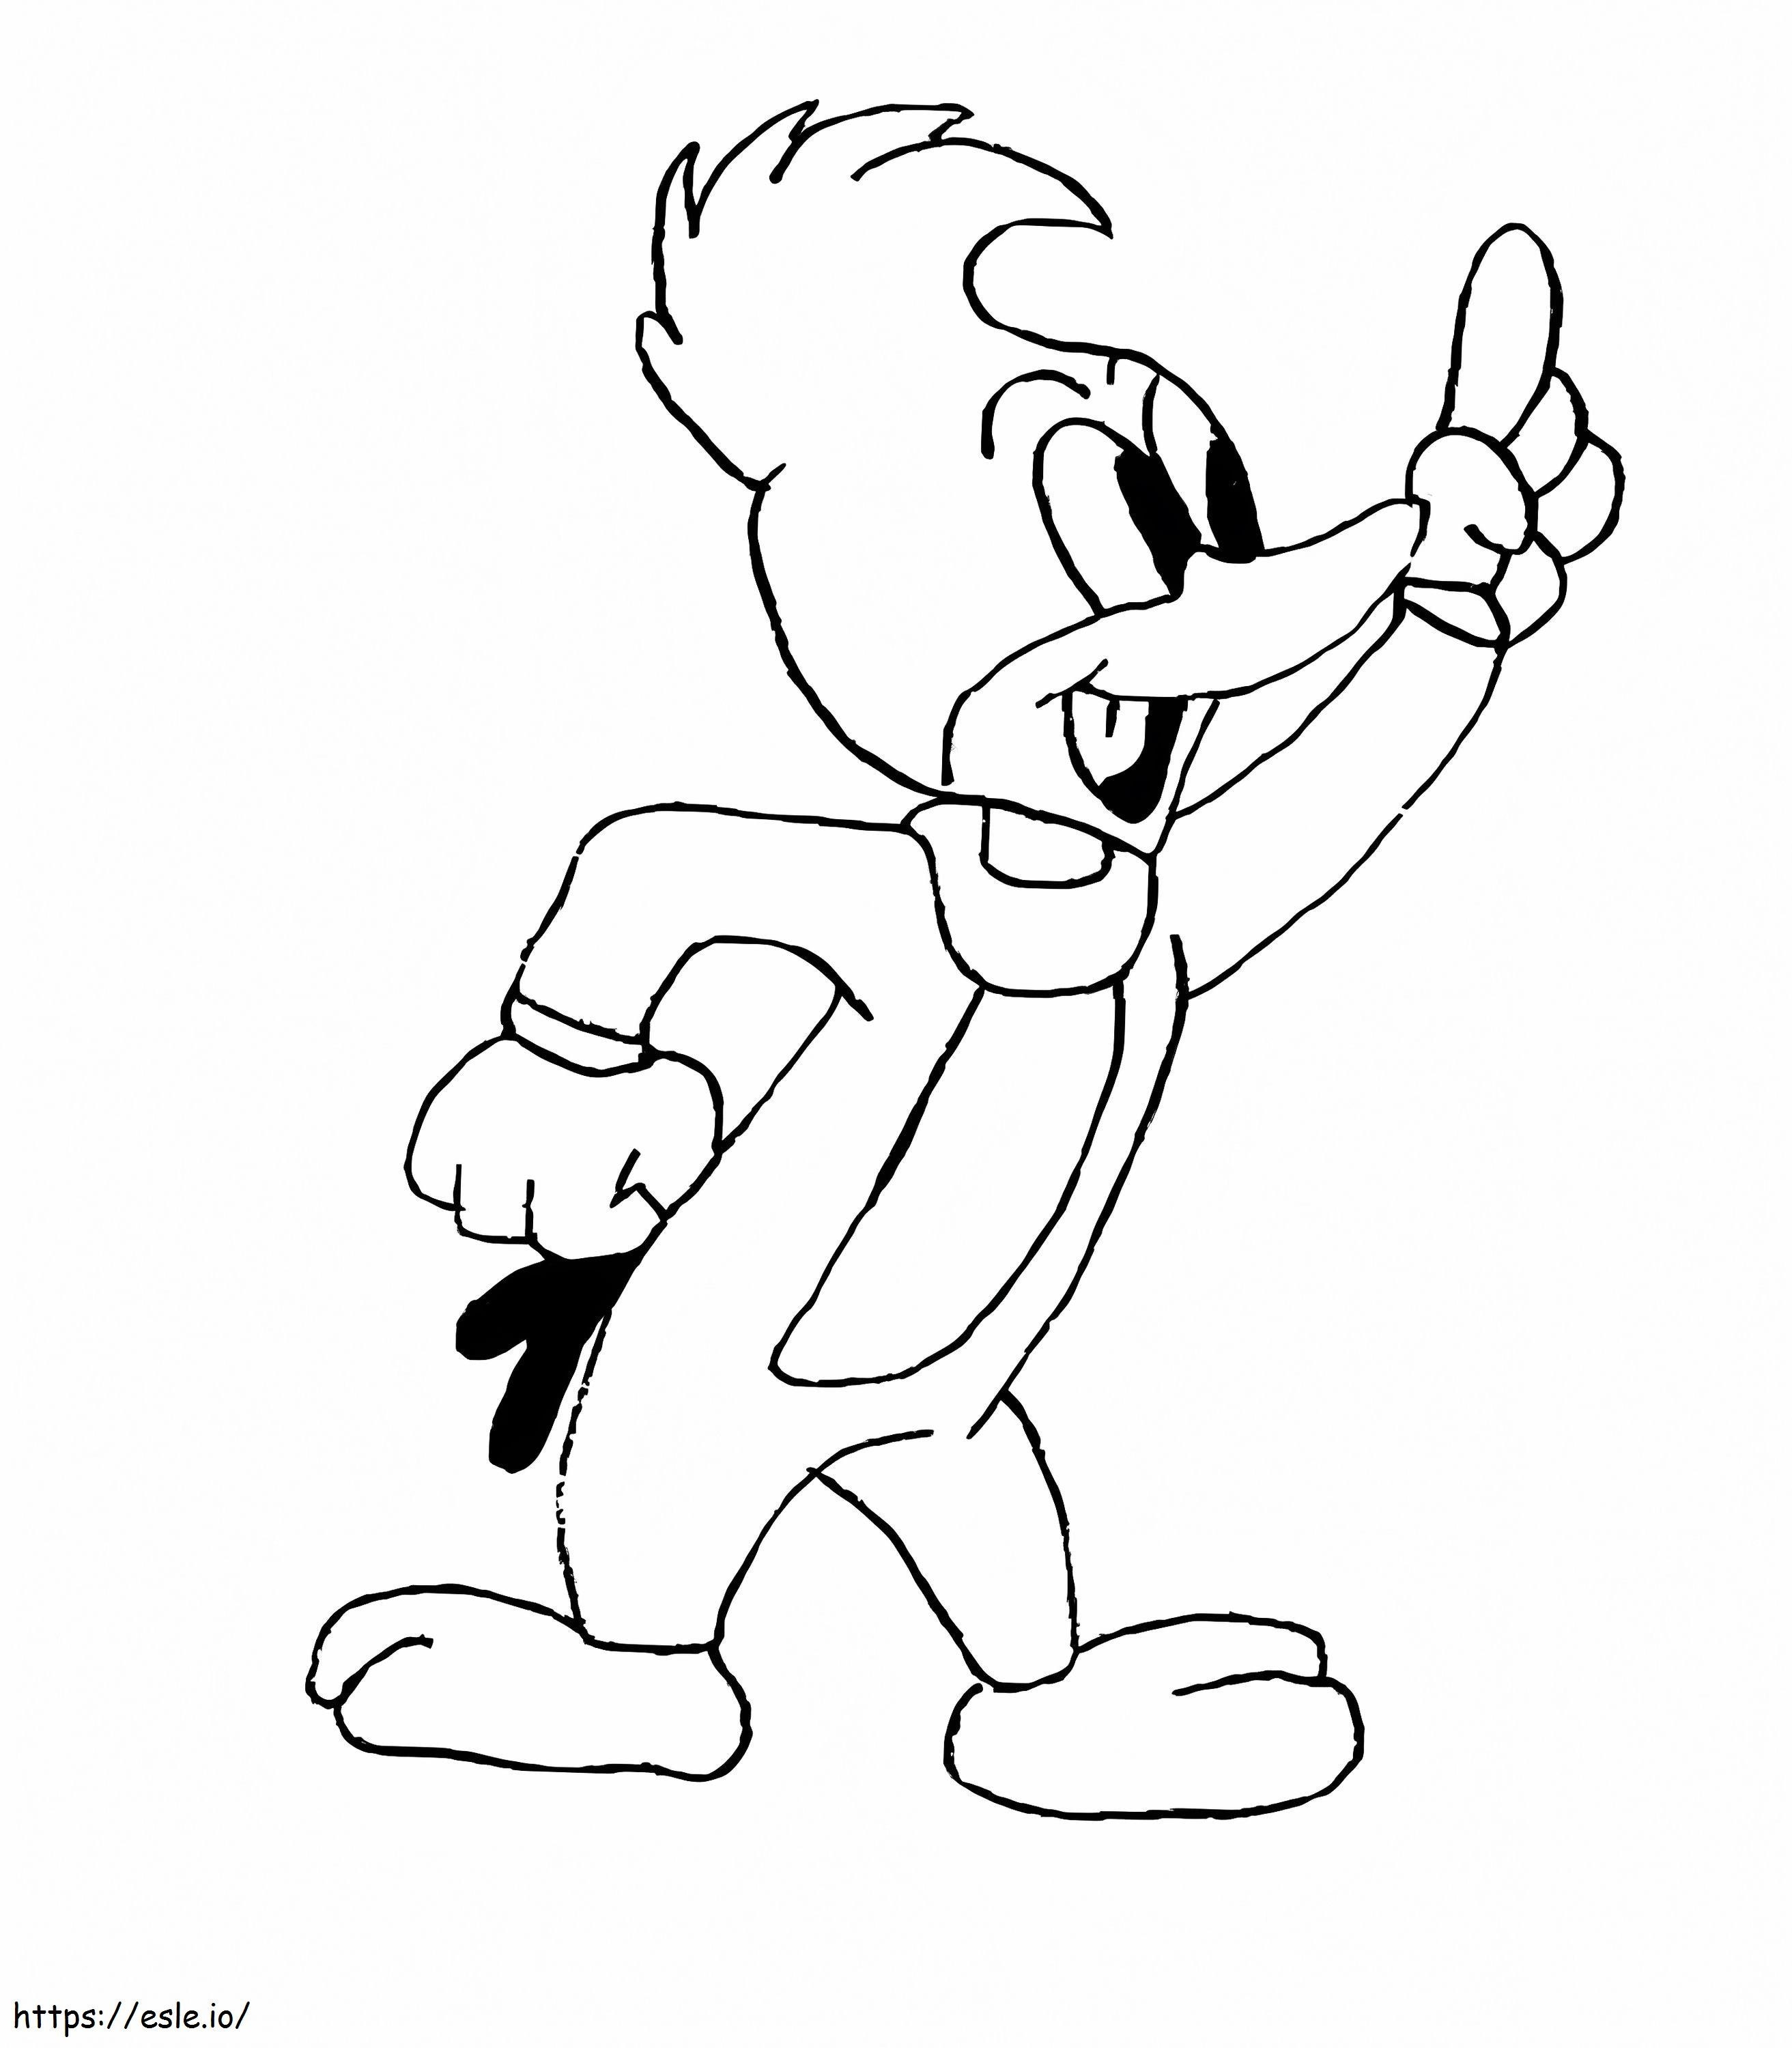 Woody Woodpecker Talking coloring page